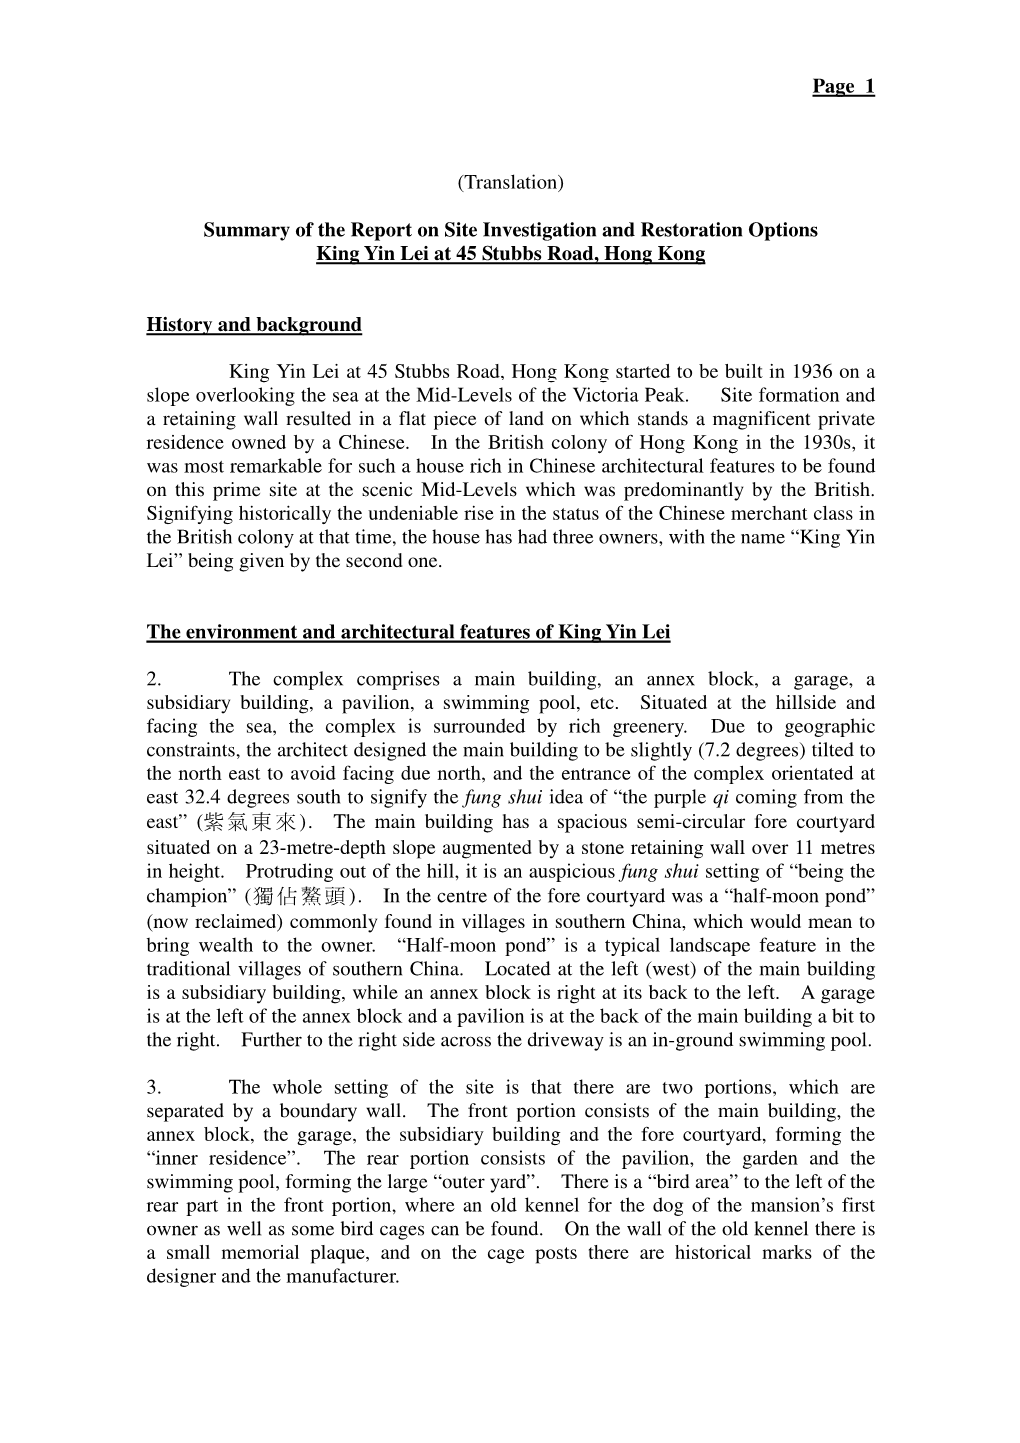 Page 1 (Translation) Summary of the Report on Site Investigation and Restoration Options King Yin Lei at 45 Stubbs Road, Hong Ko